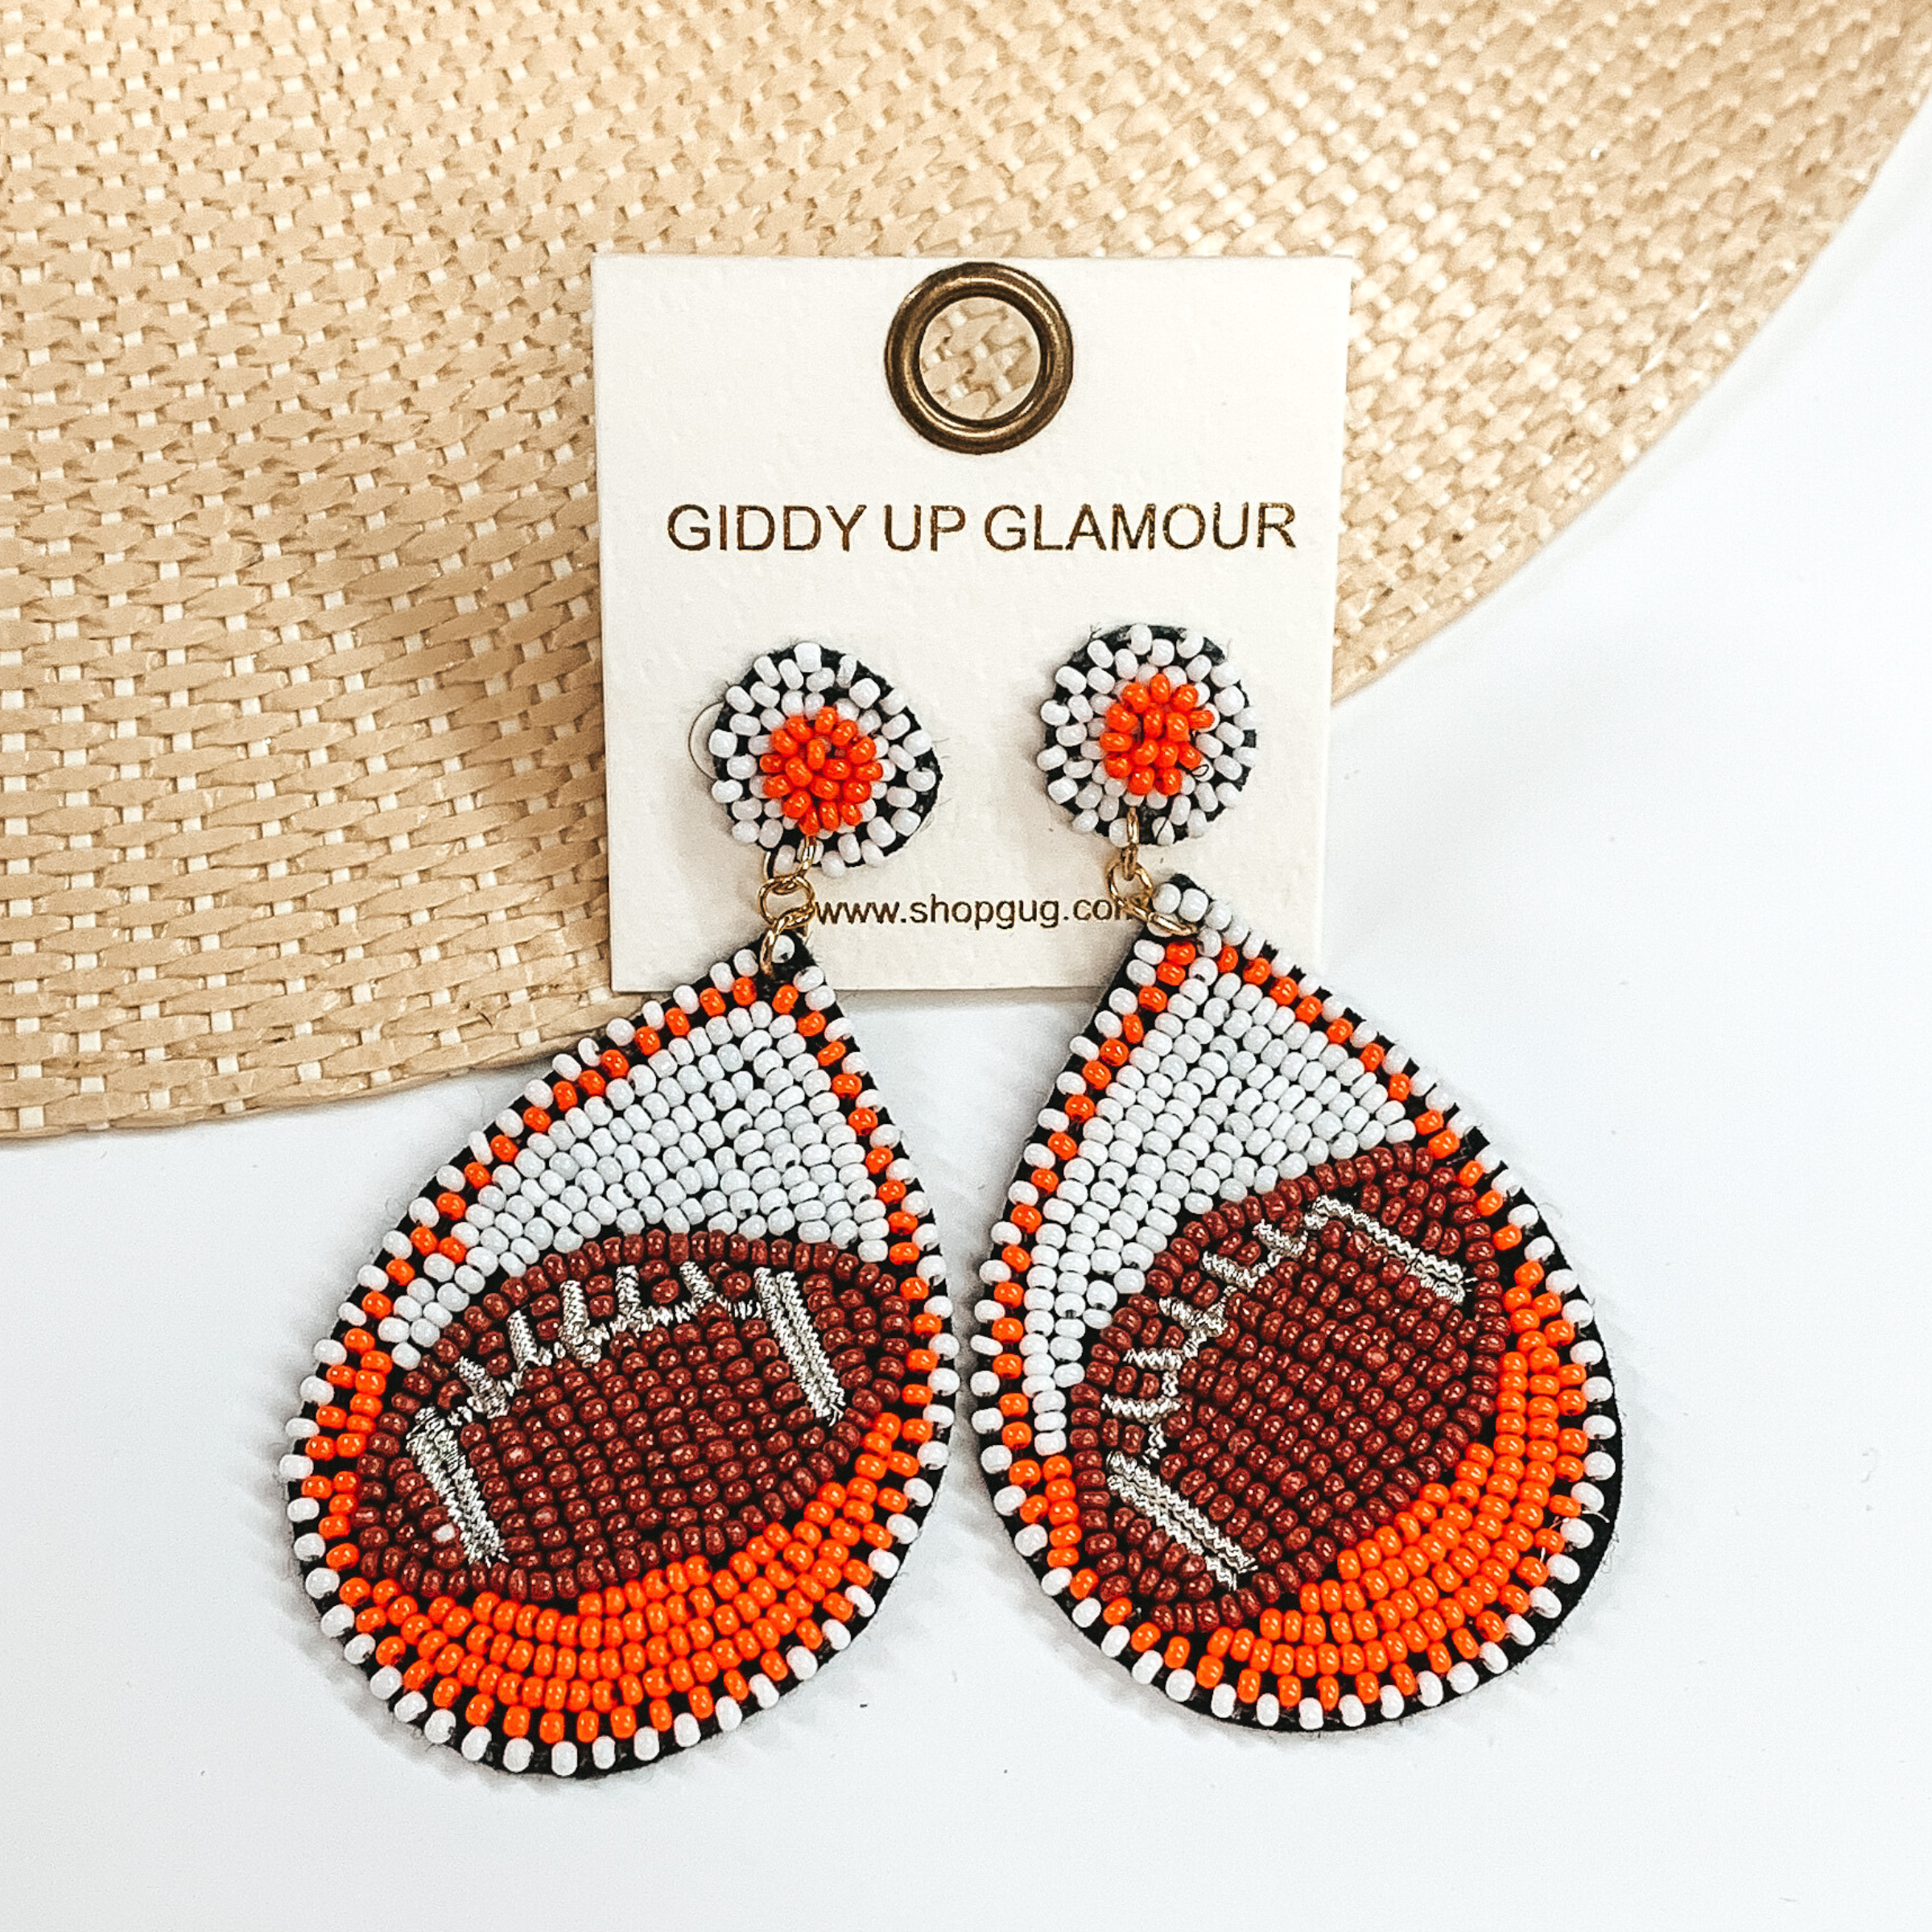 Pictured are a pair of beaded post back earrings with teardrop pendants. These earrings include white and orange beads with a brown football design. These earrings are pictured laying in a straw hat brim on a white background. 